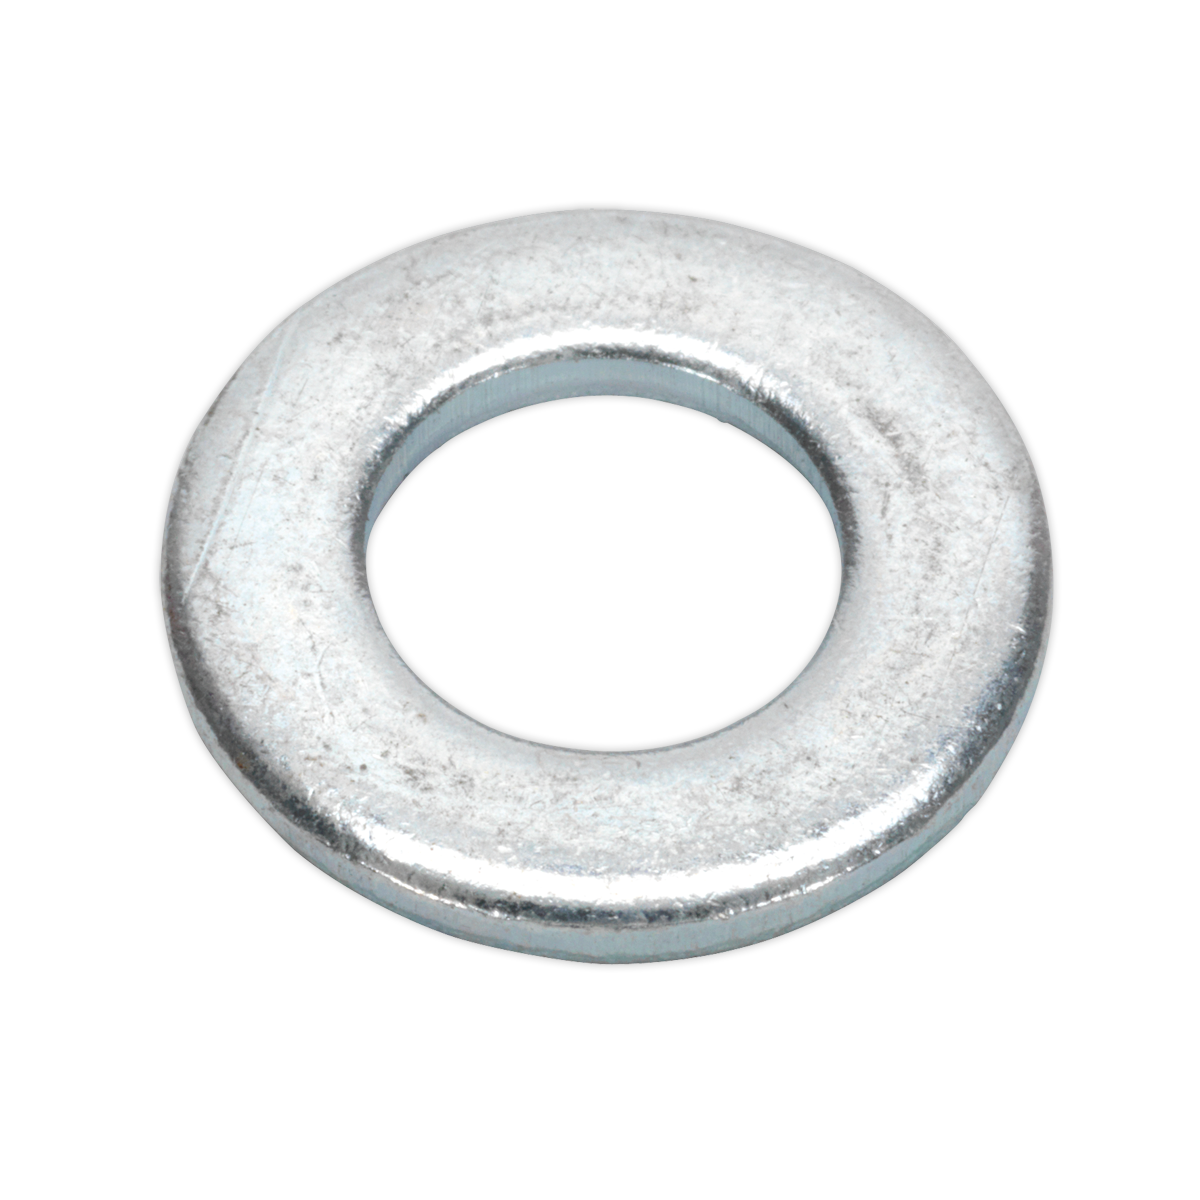 Sealey Flat Washer DIN 125 M10 x 21mm Form A Zinc Pack of 100